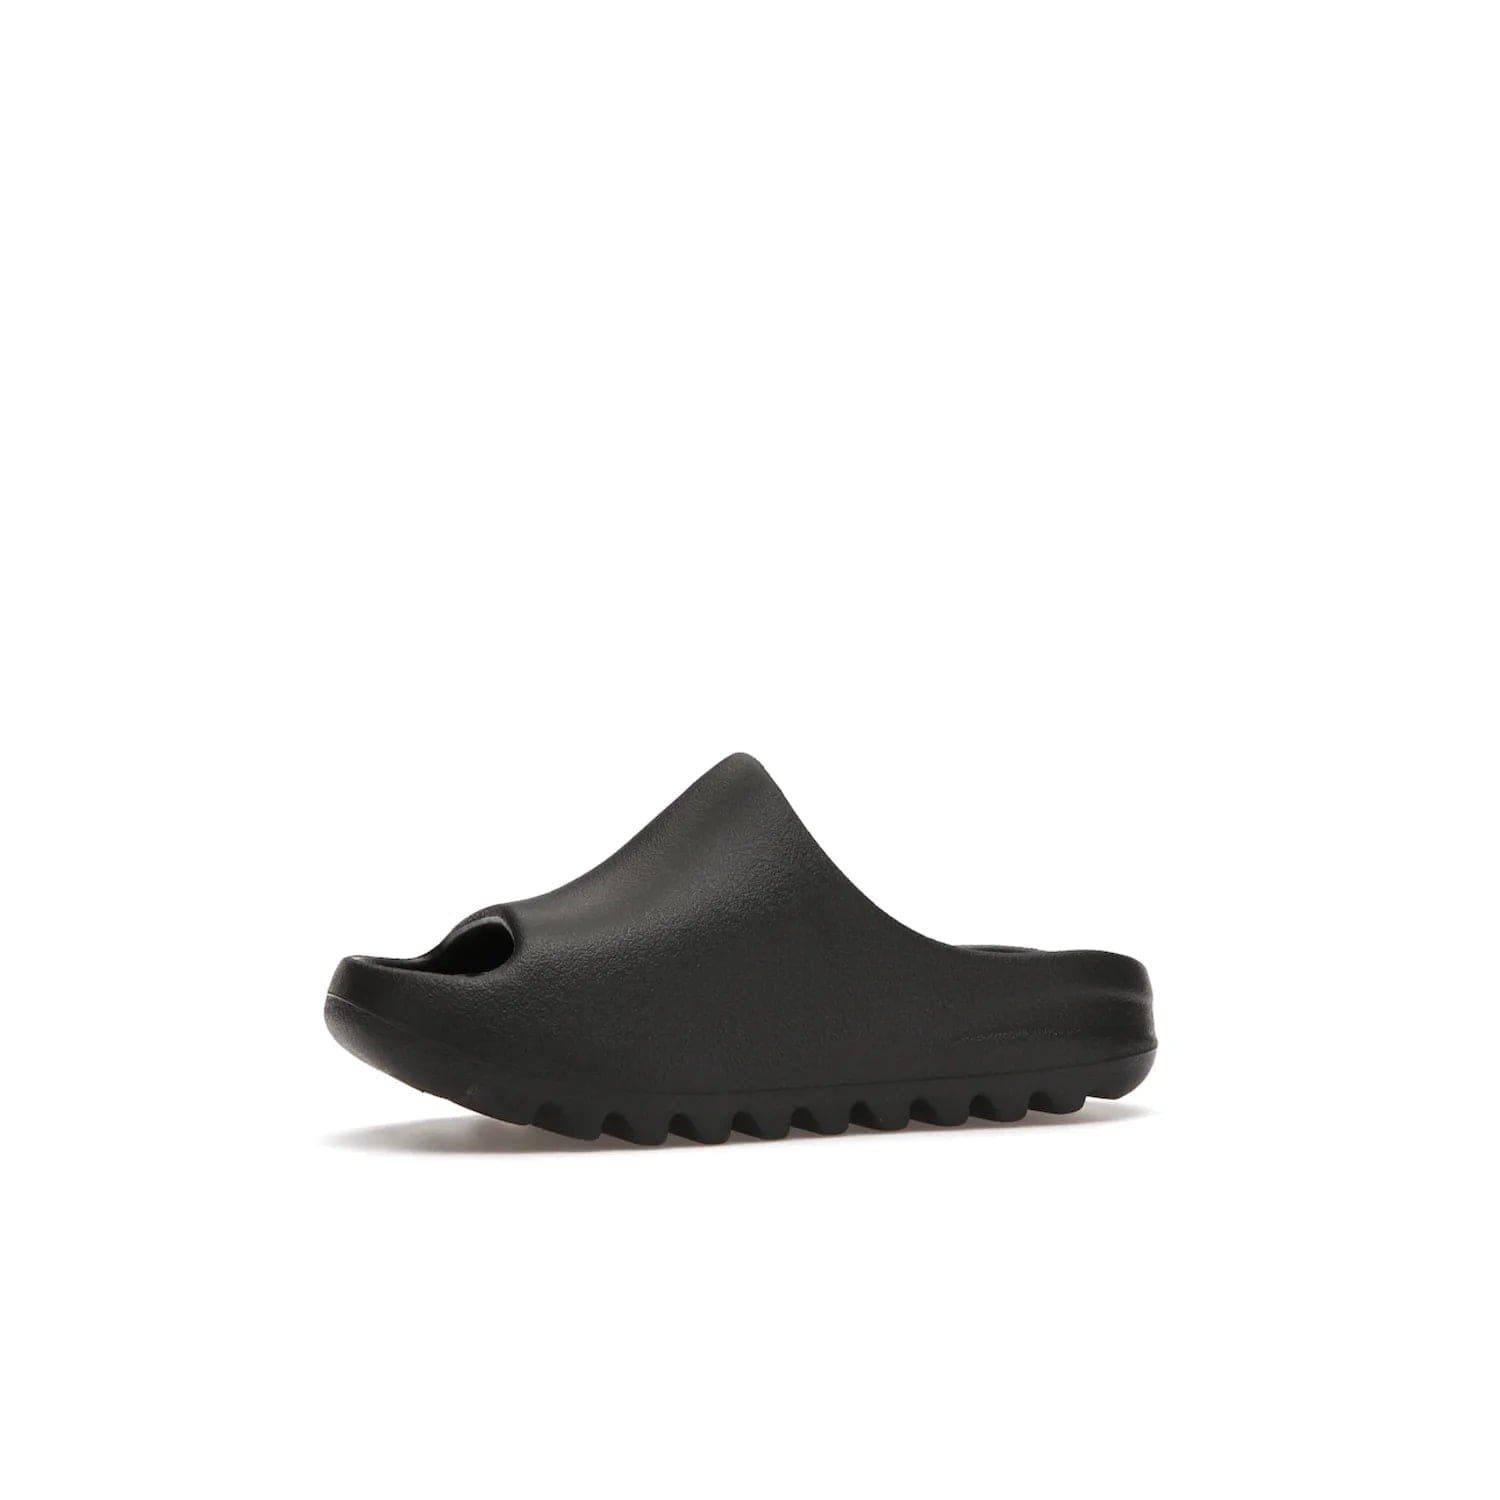 adidas Yeezy Slide Onyx (Kids) - Image 17 - Only at www.BallersClubKickz.com - adidas Yeezy Slide Onyx (Kids): Comfortable foam construction with textured surface and iconic three-stripe logo. Breathable, open-toe design and deep grooves for traction. Released in March 2021 at $50.